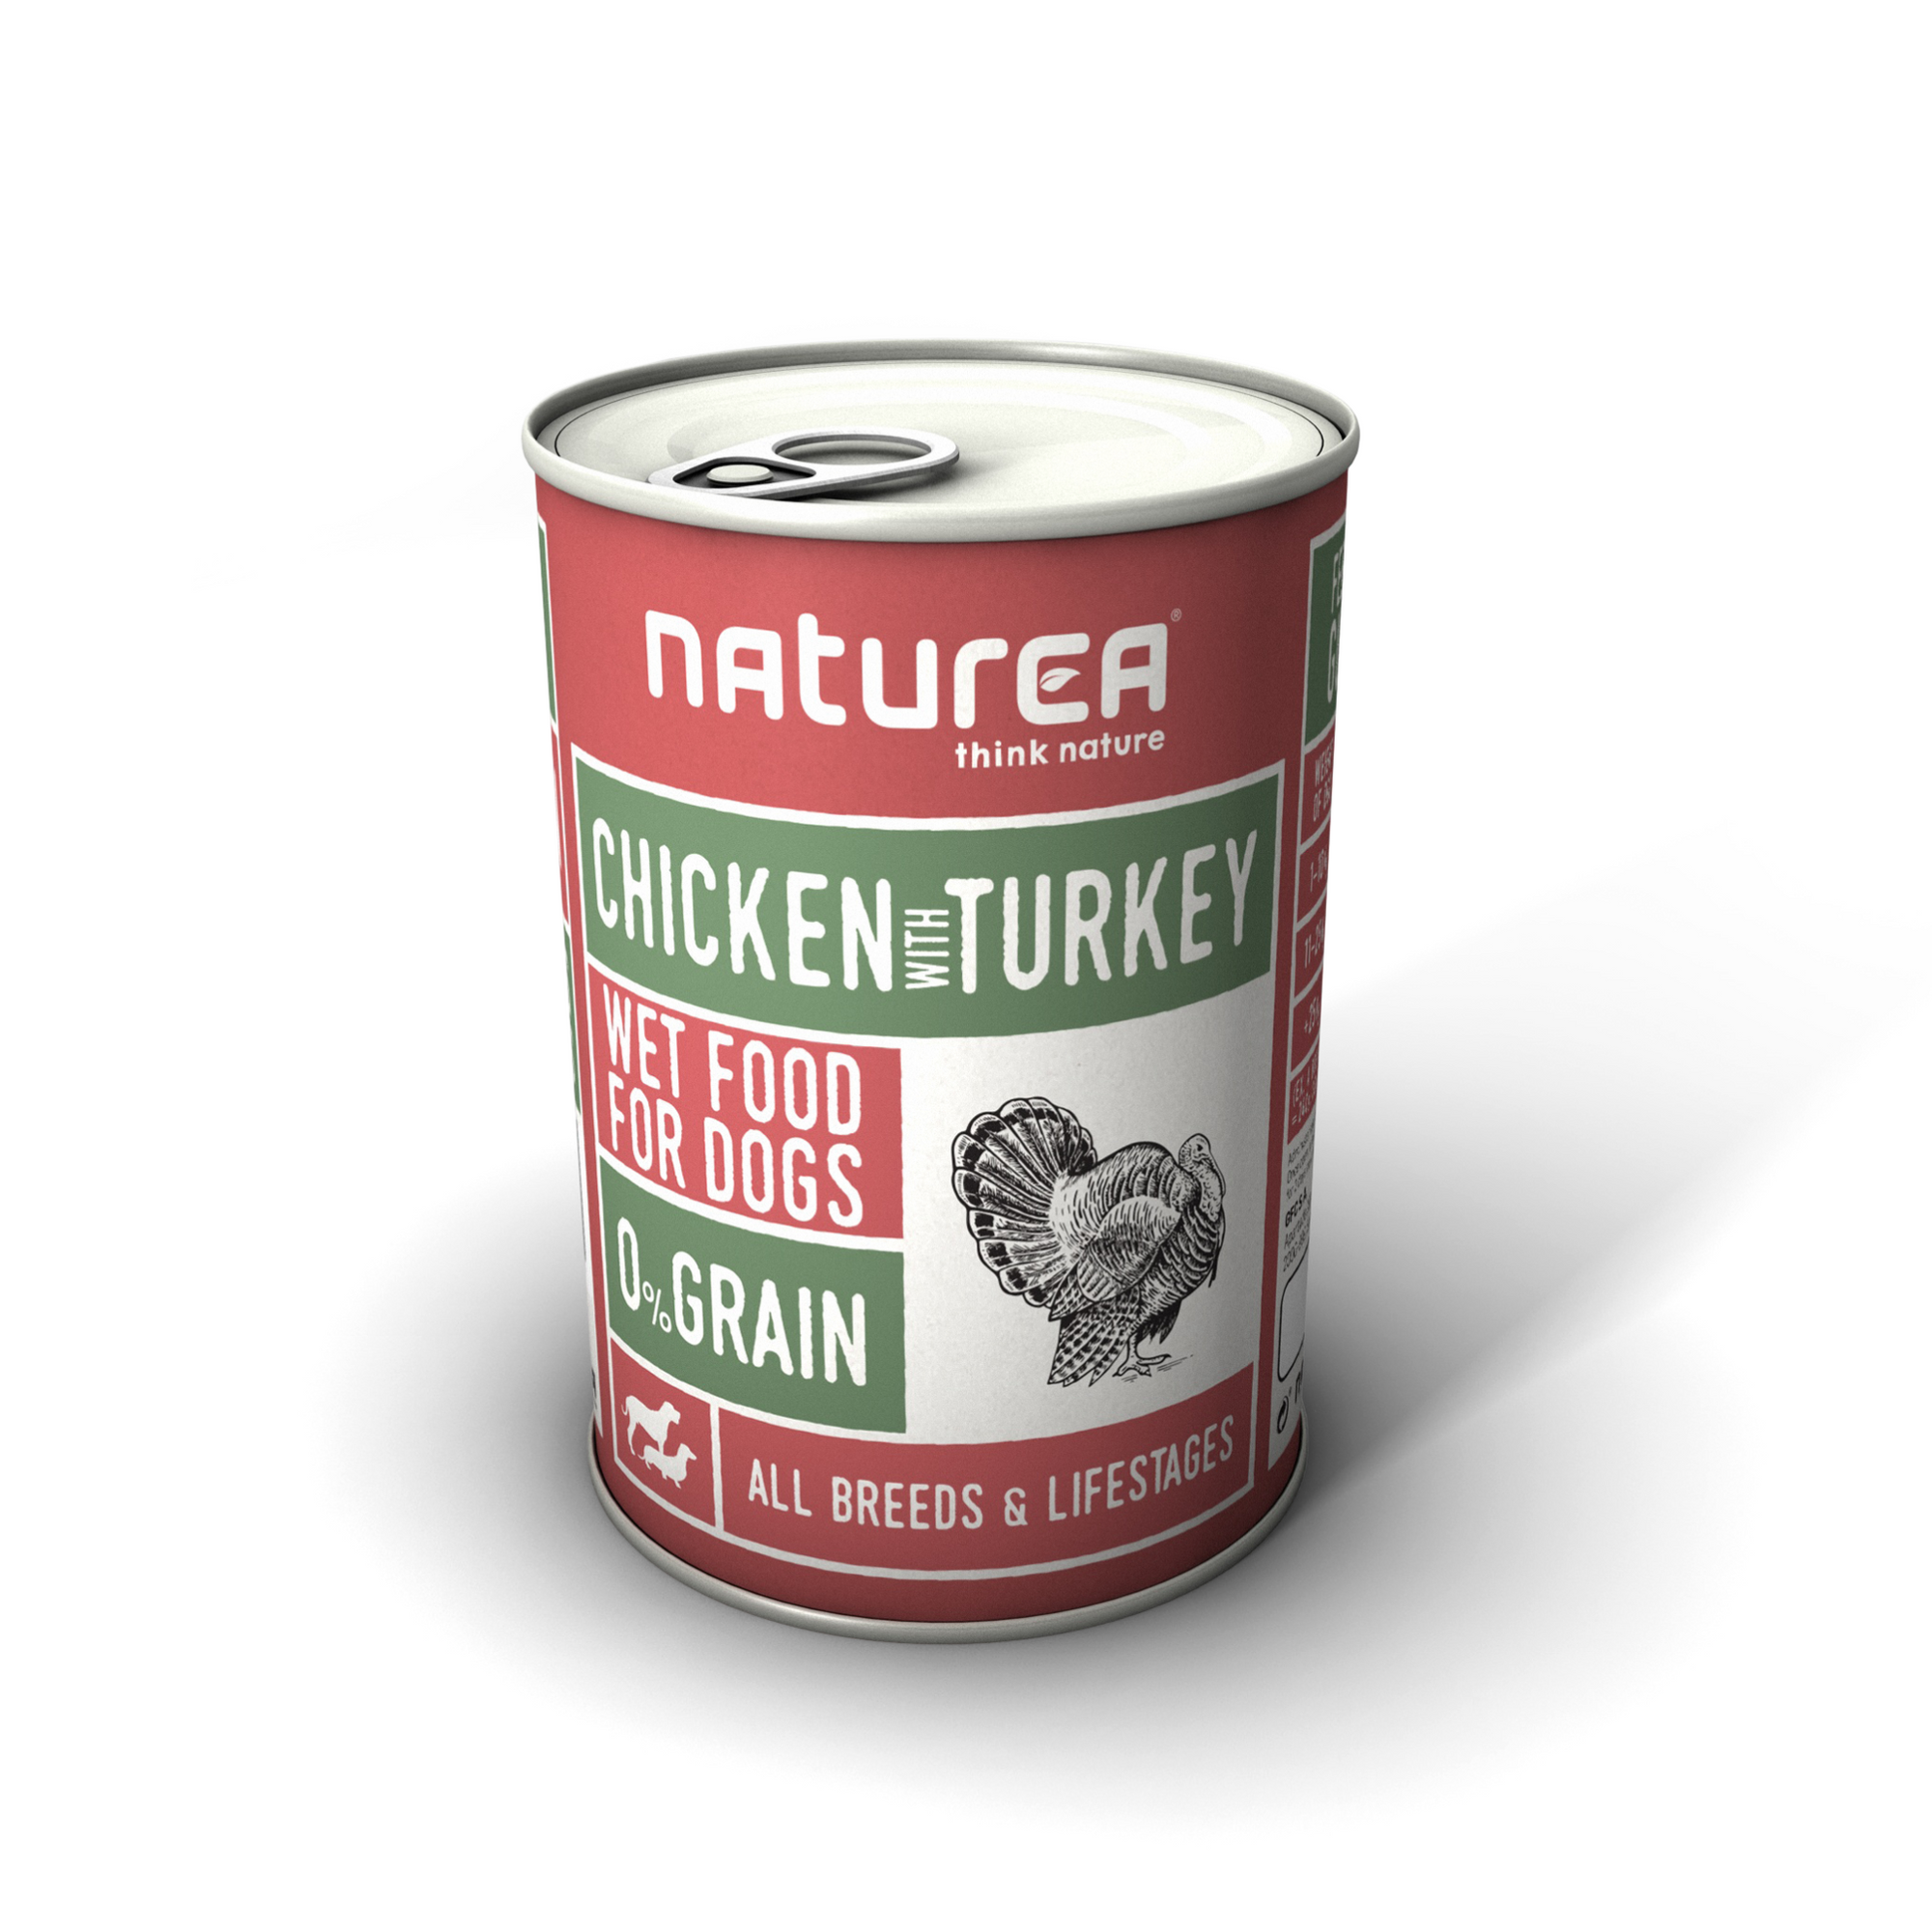 Canned fresh chicken with turkey meat for dogs 400 g